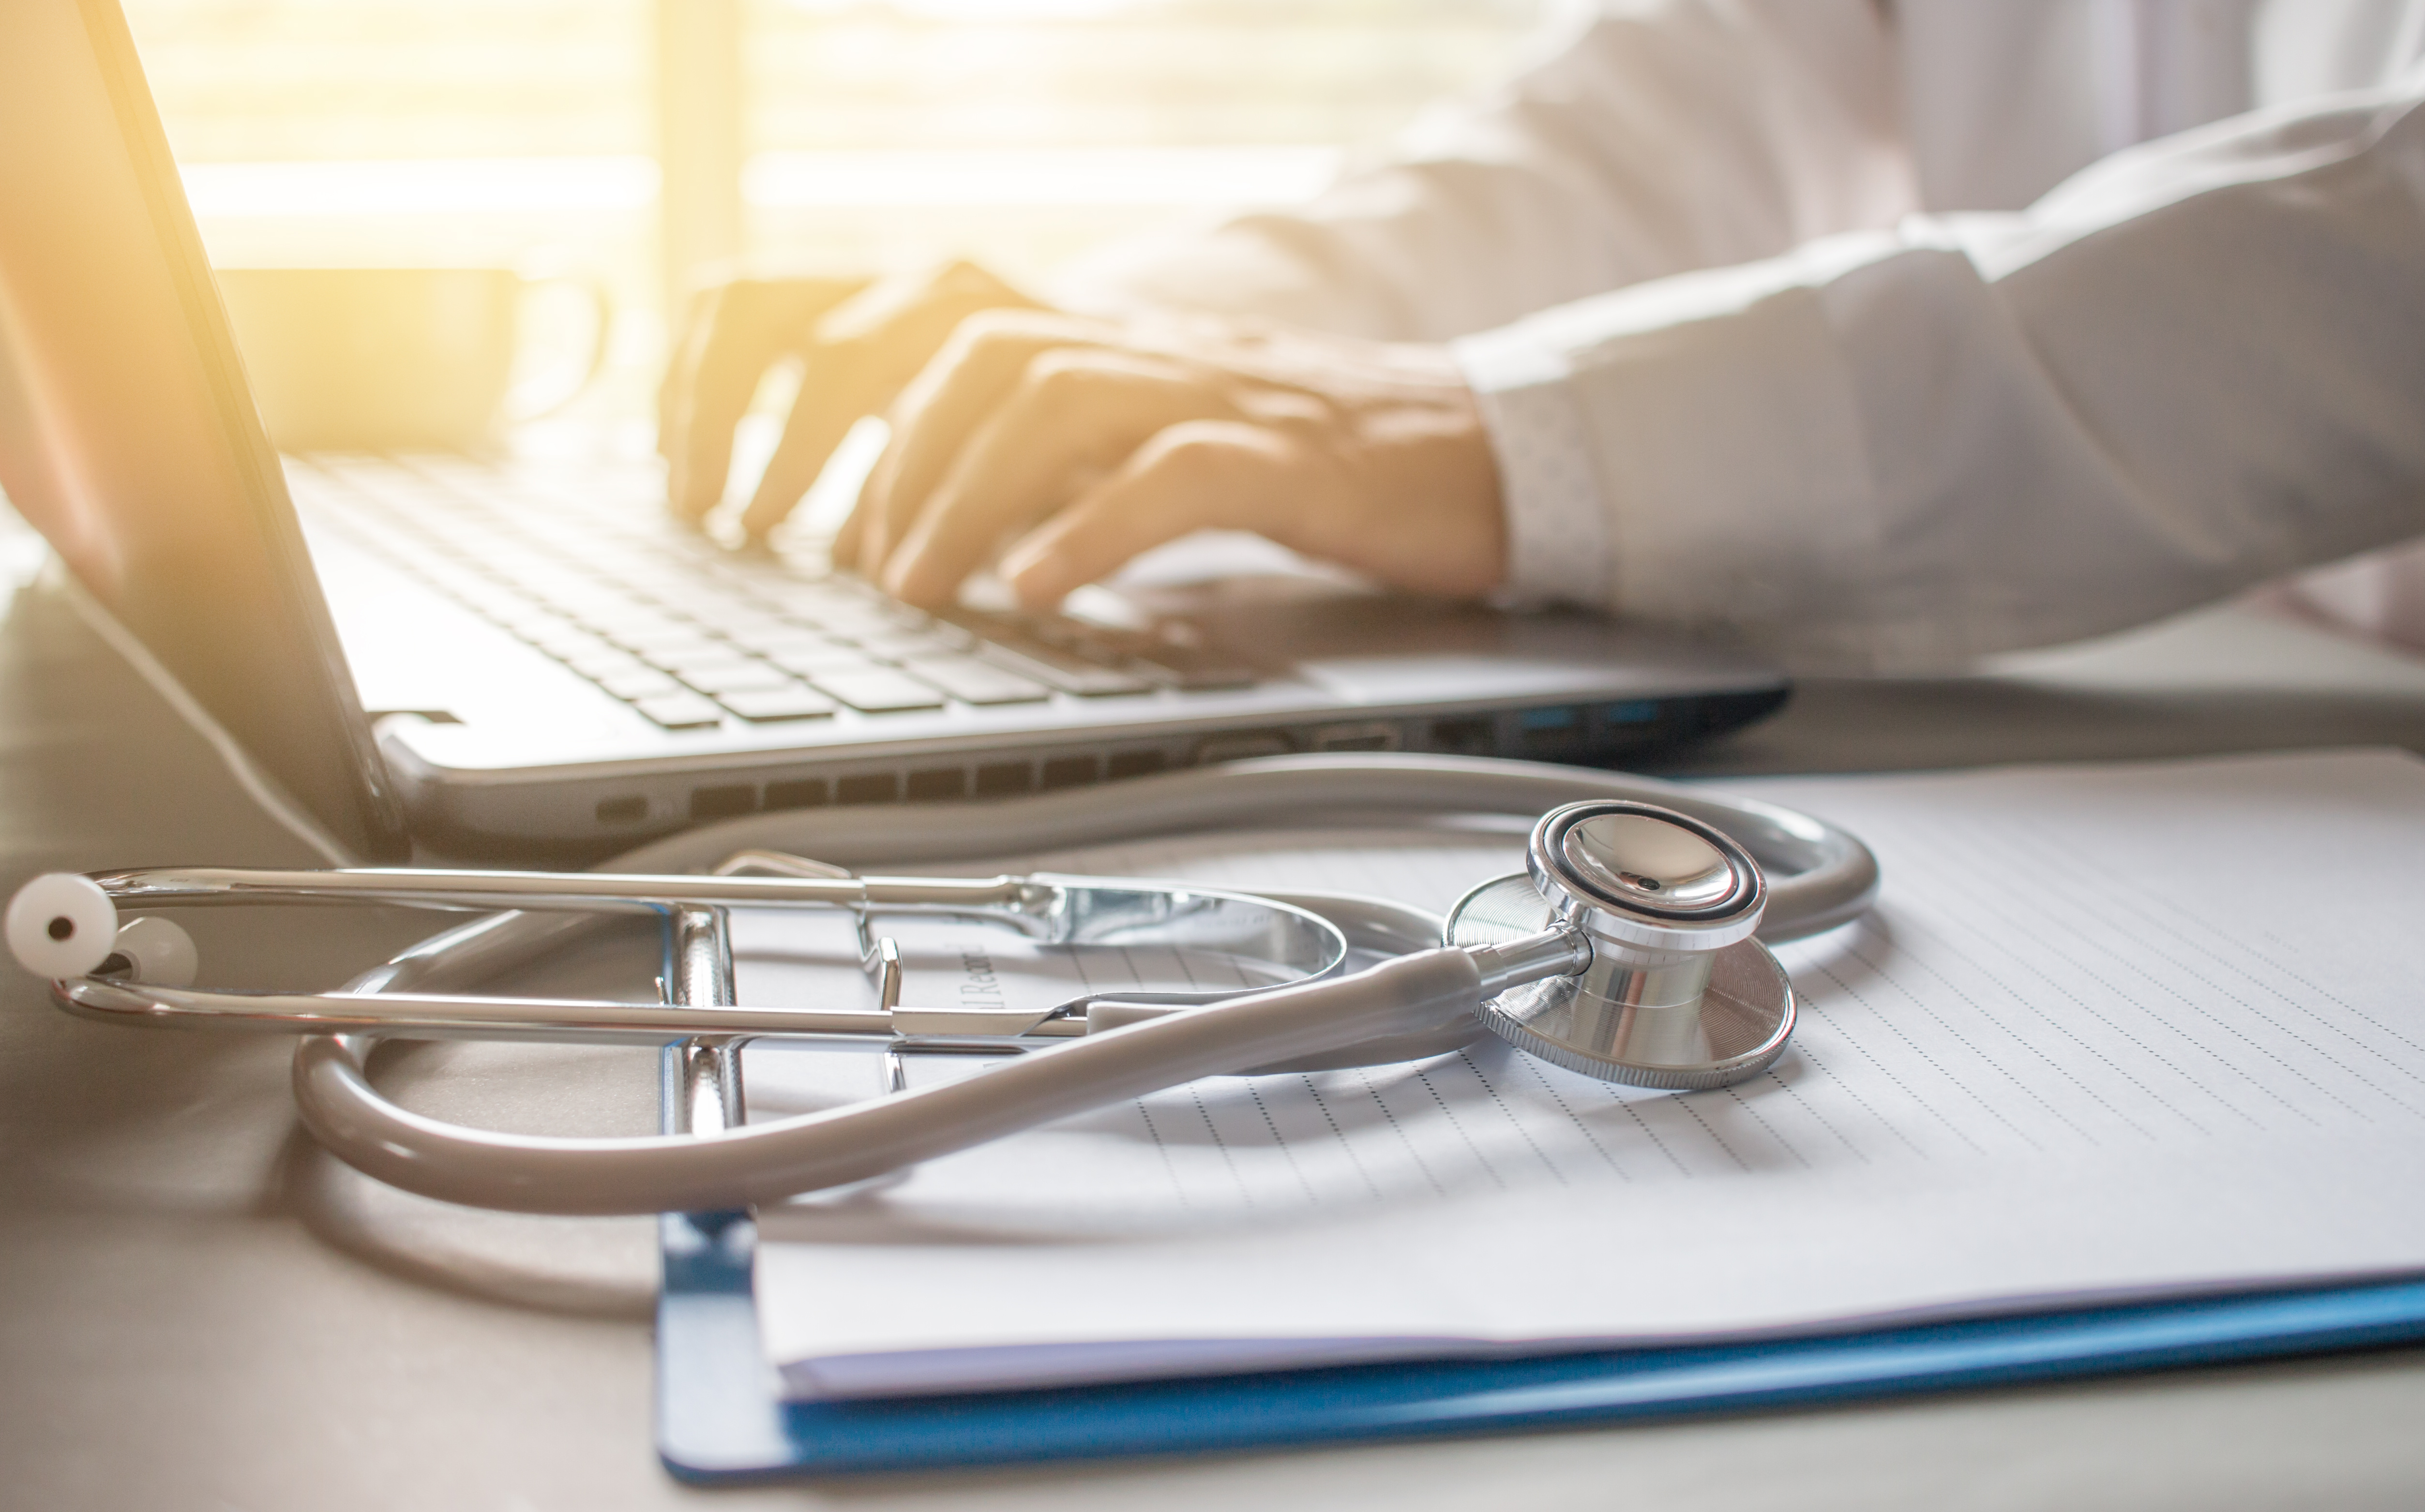 Image of a health care provider's hands hovering over a laptop computer beside a stethoscope laying on top of a medical file.